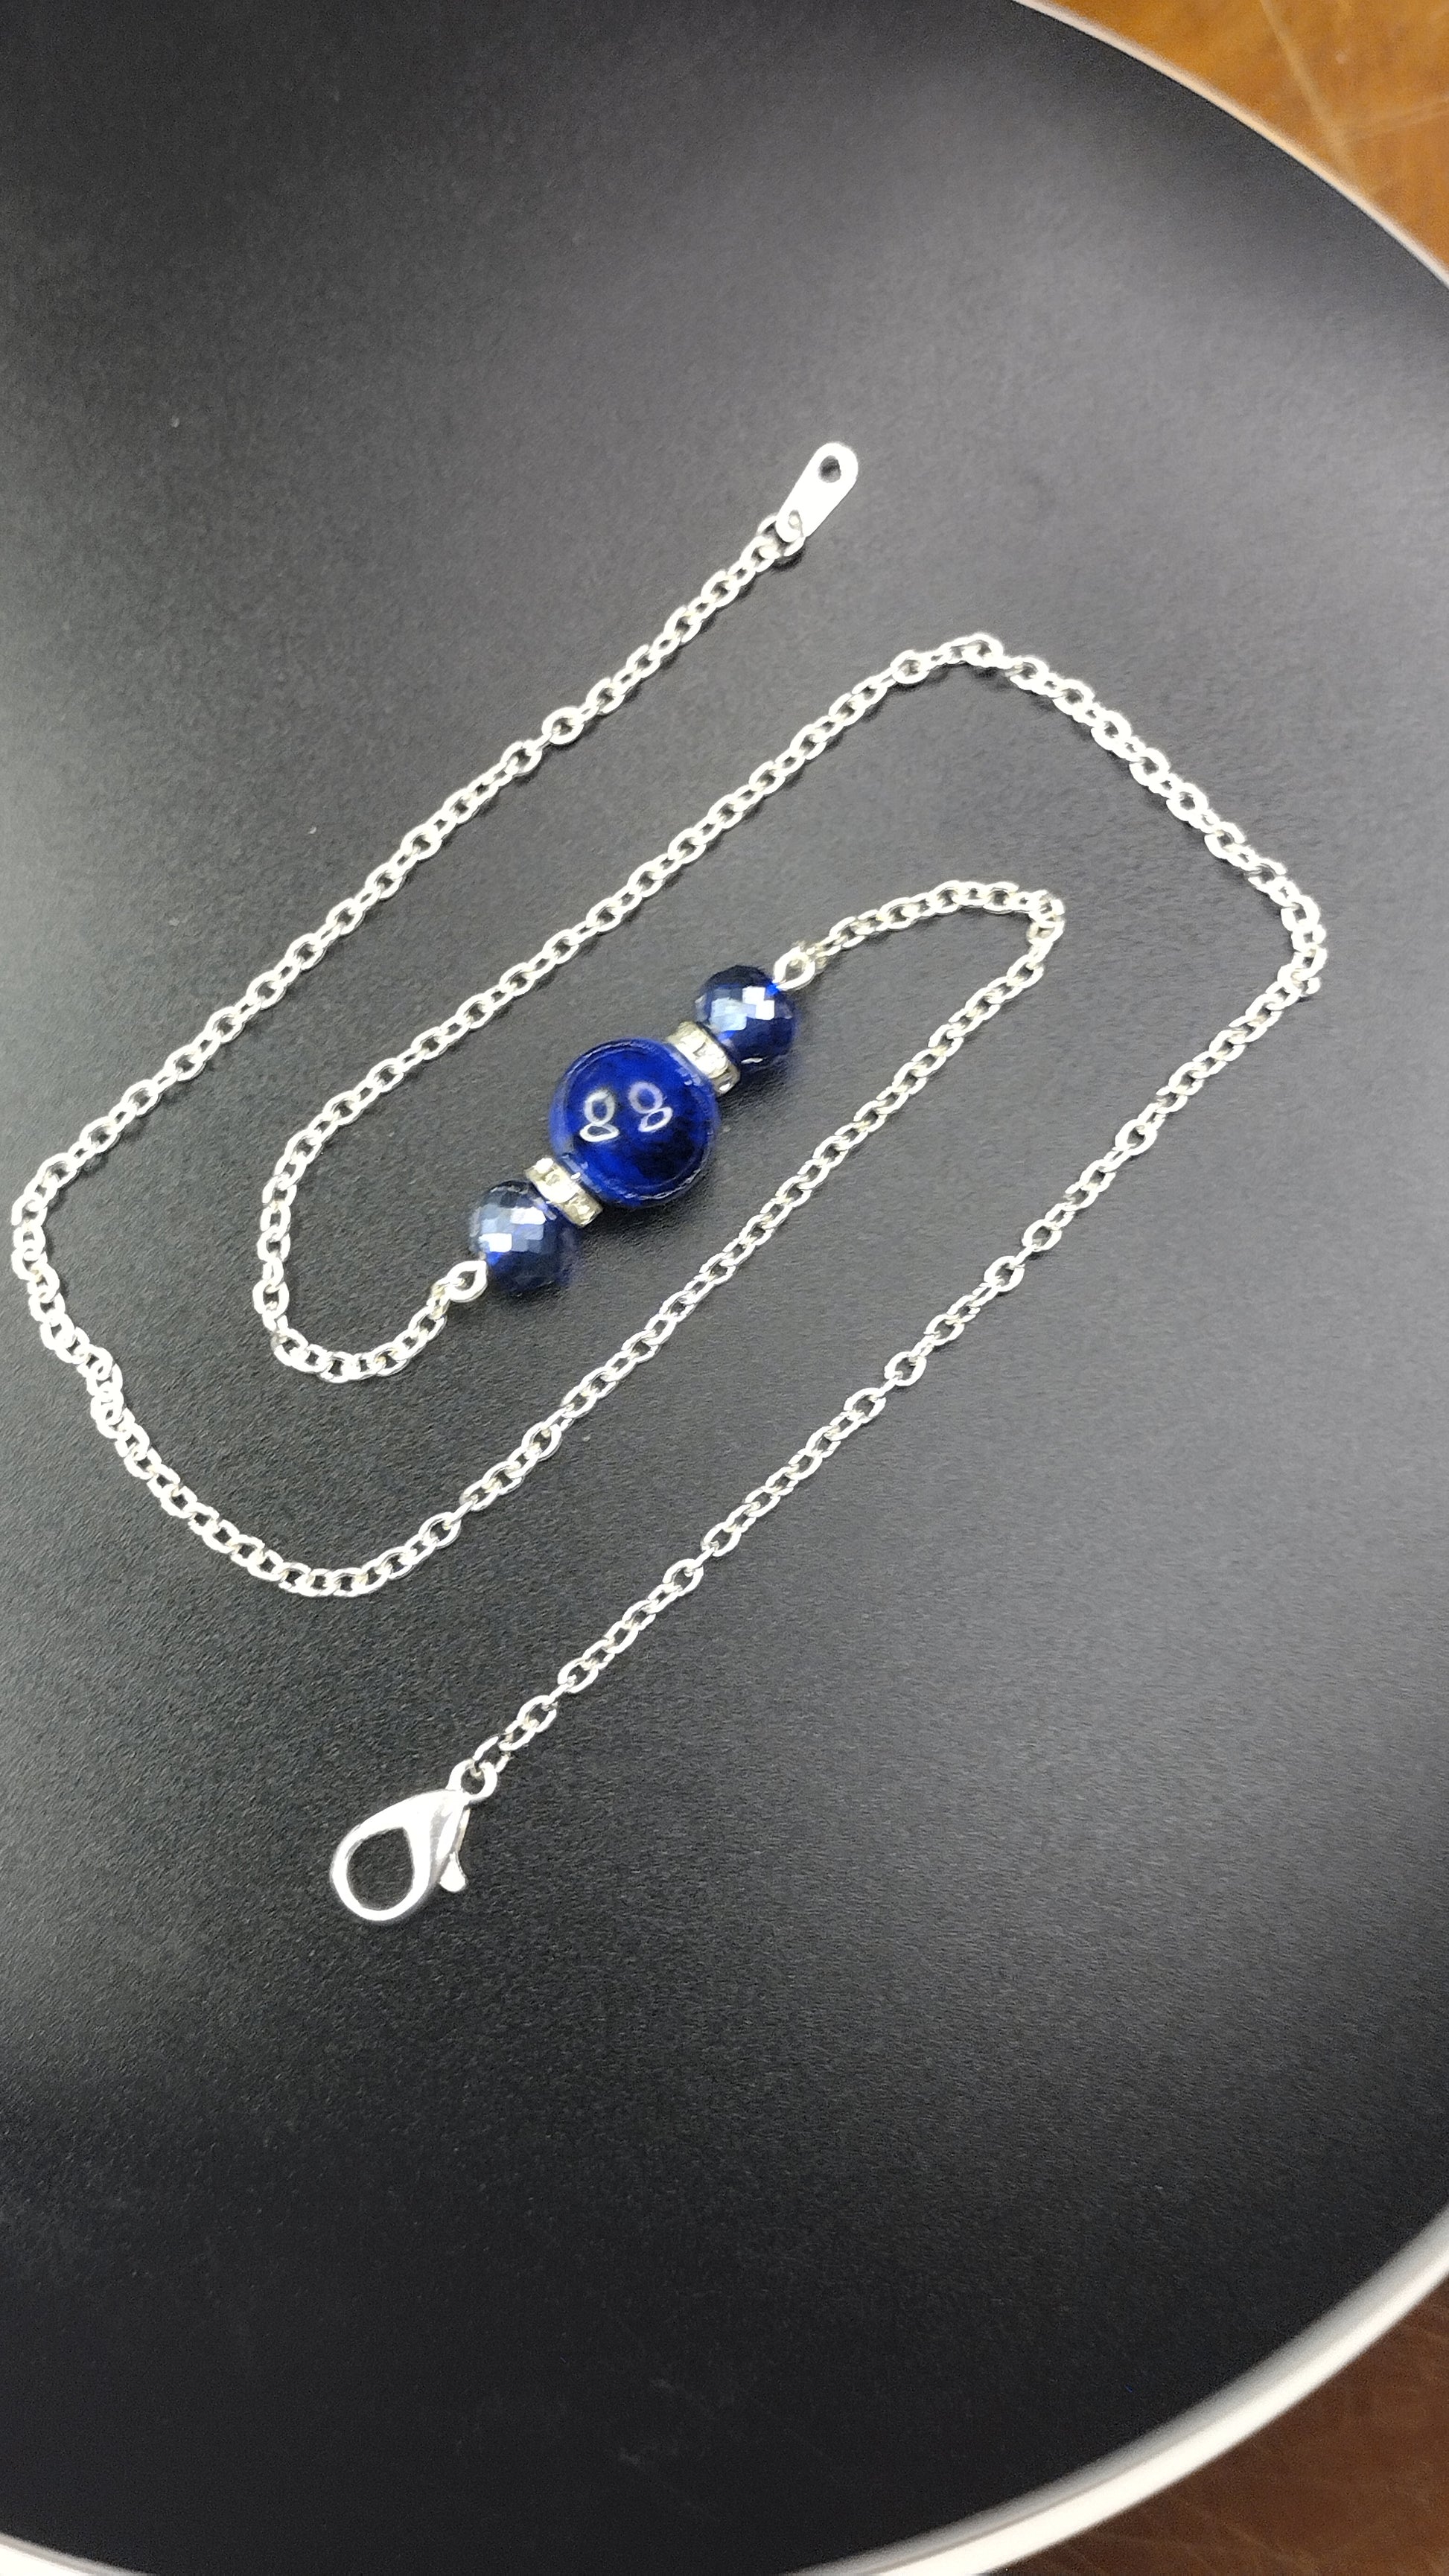 Blue Crystal Bar Necklace Pretty Pineapple Bead Pretty Pineapple Bead